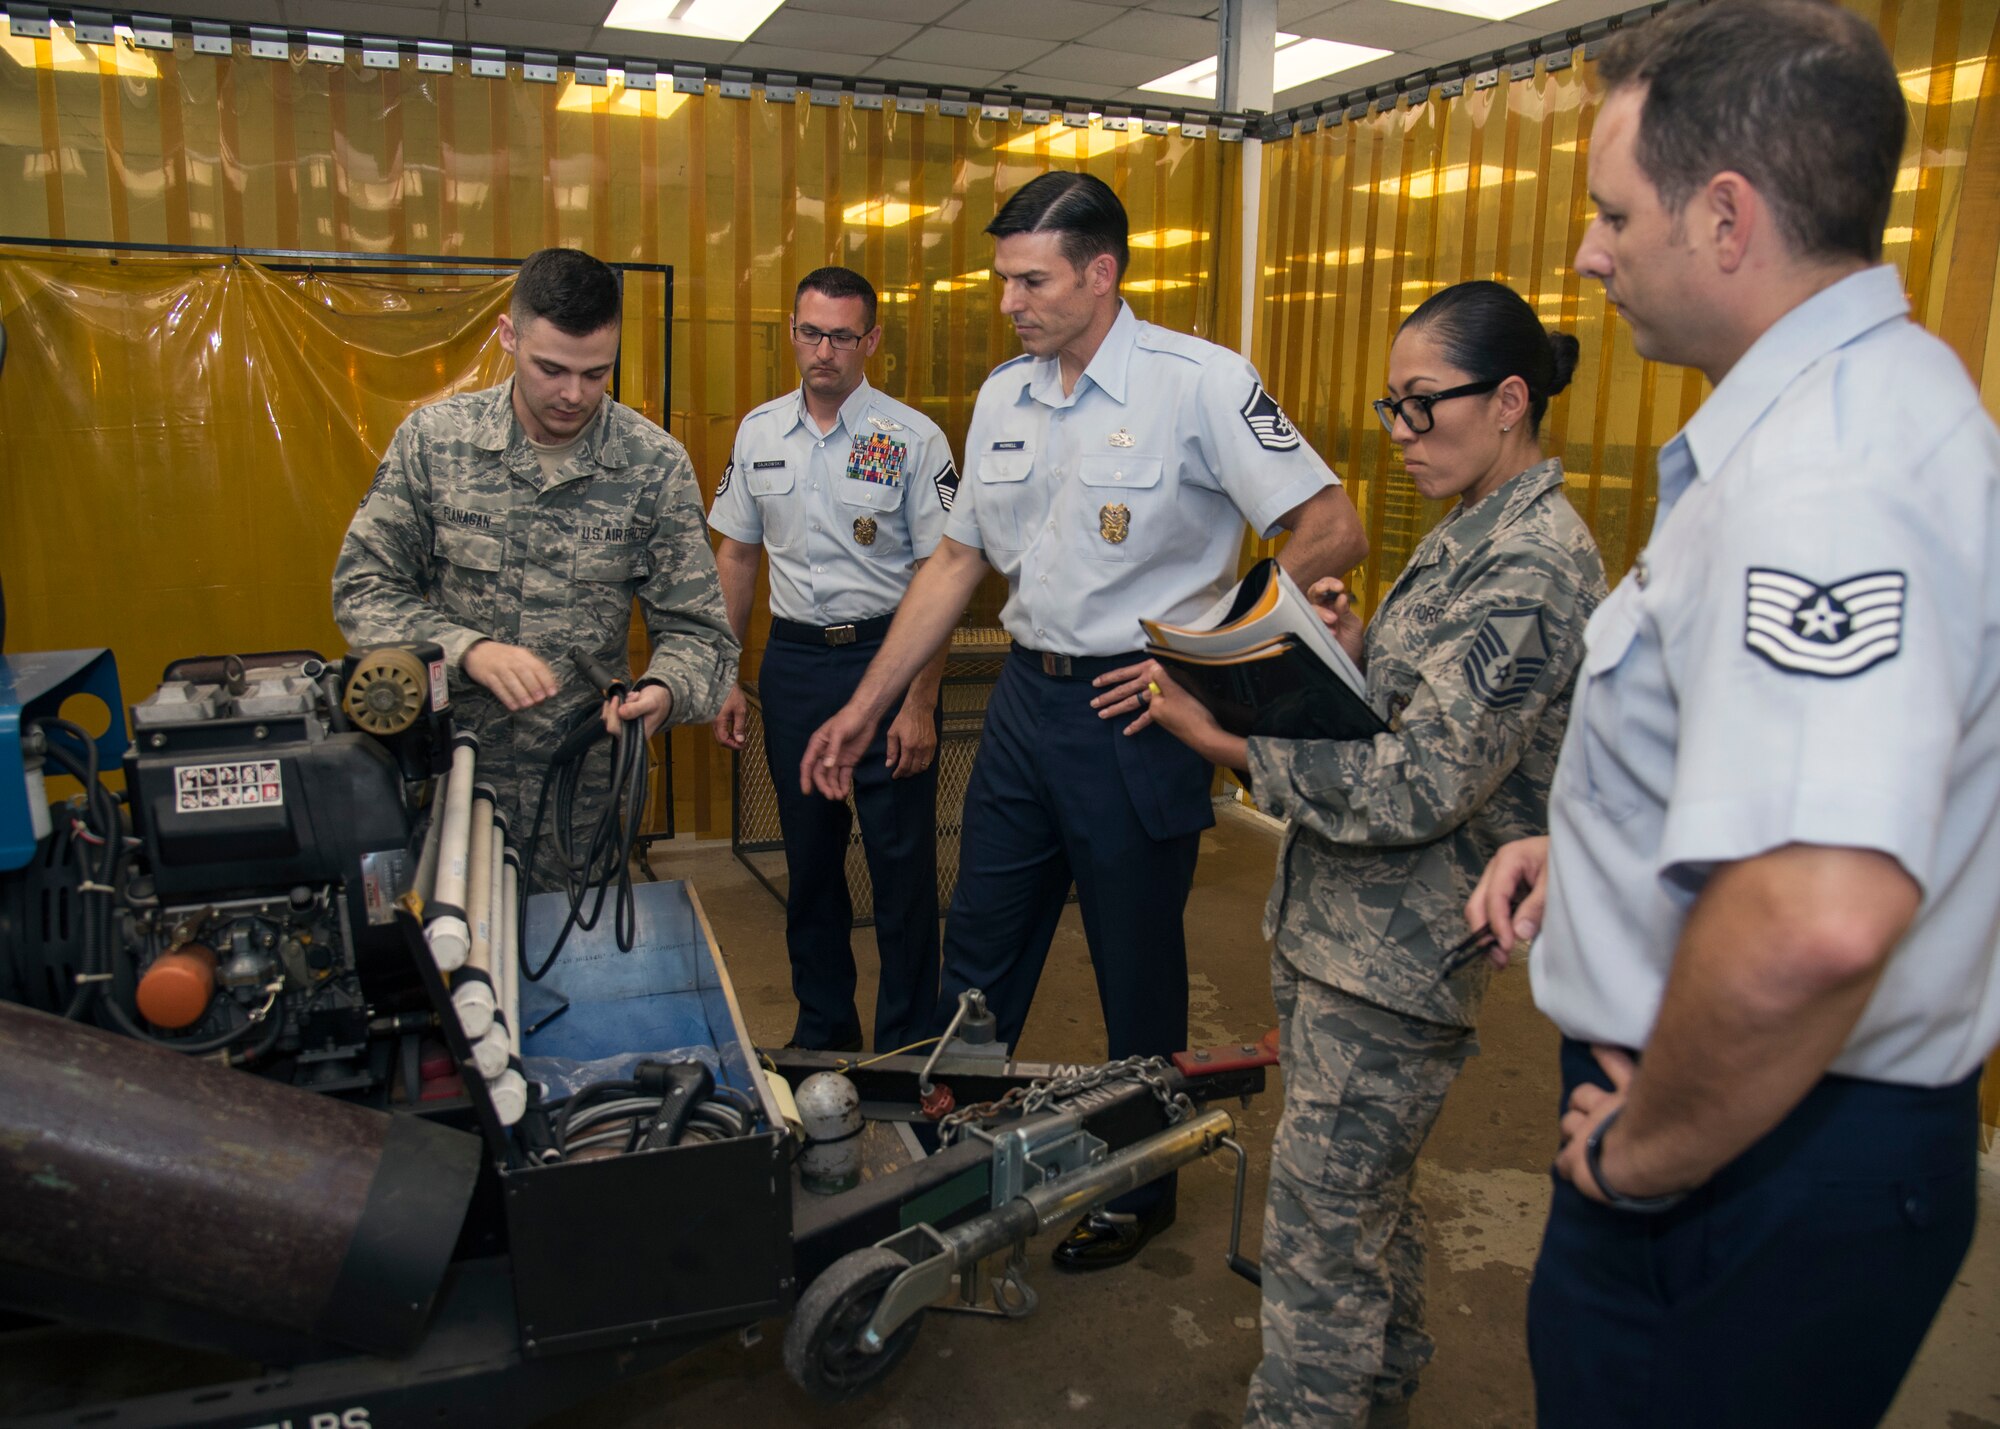 U.S. Air Force Staff Sgt. Andrew Flanagan, left, aircraft metals technician craftsman assigned to the 6th Maintenance Squadron, briefs 6th Air Mobility Wing Inspector General inspectors, during a Horizontal Inspection at MacDill Air Force Base, Fla., April 30, 2018. This inspection, was part of a month-long, 15 unit, wing-wide readiness assessment.